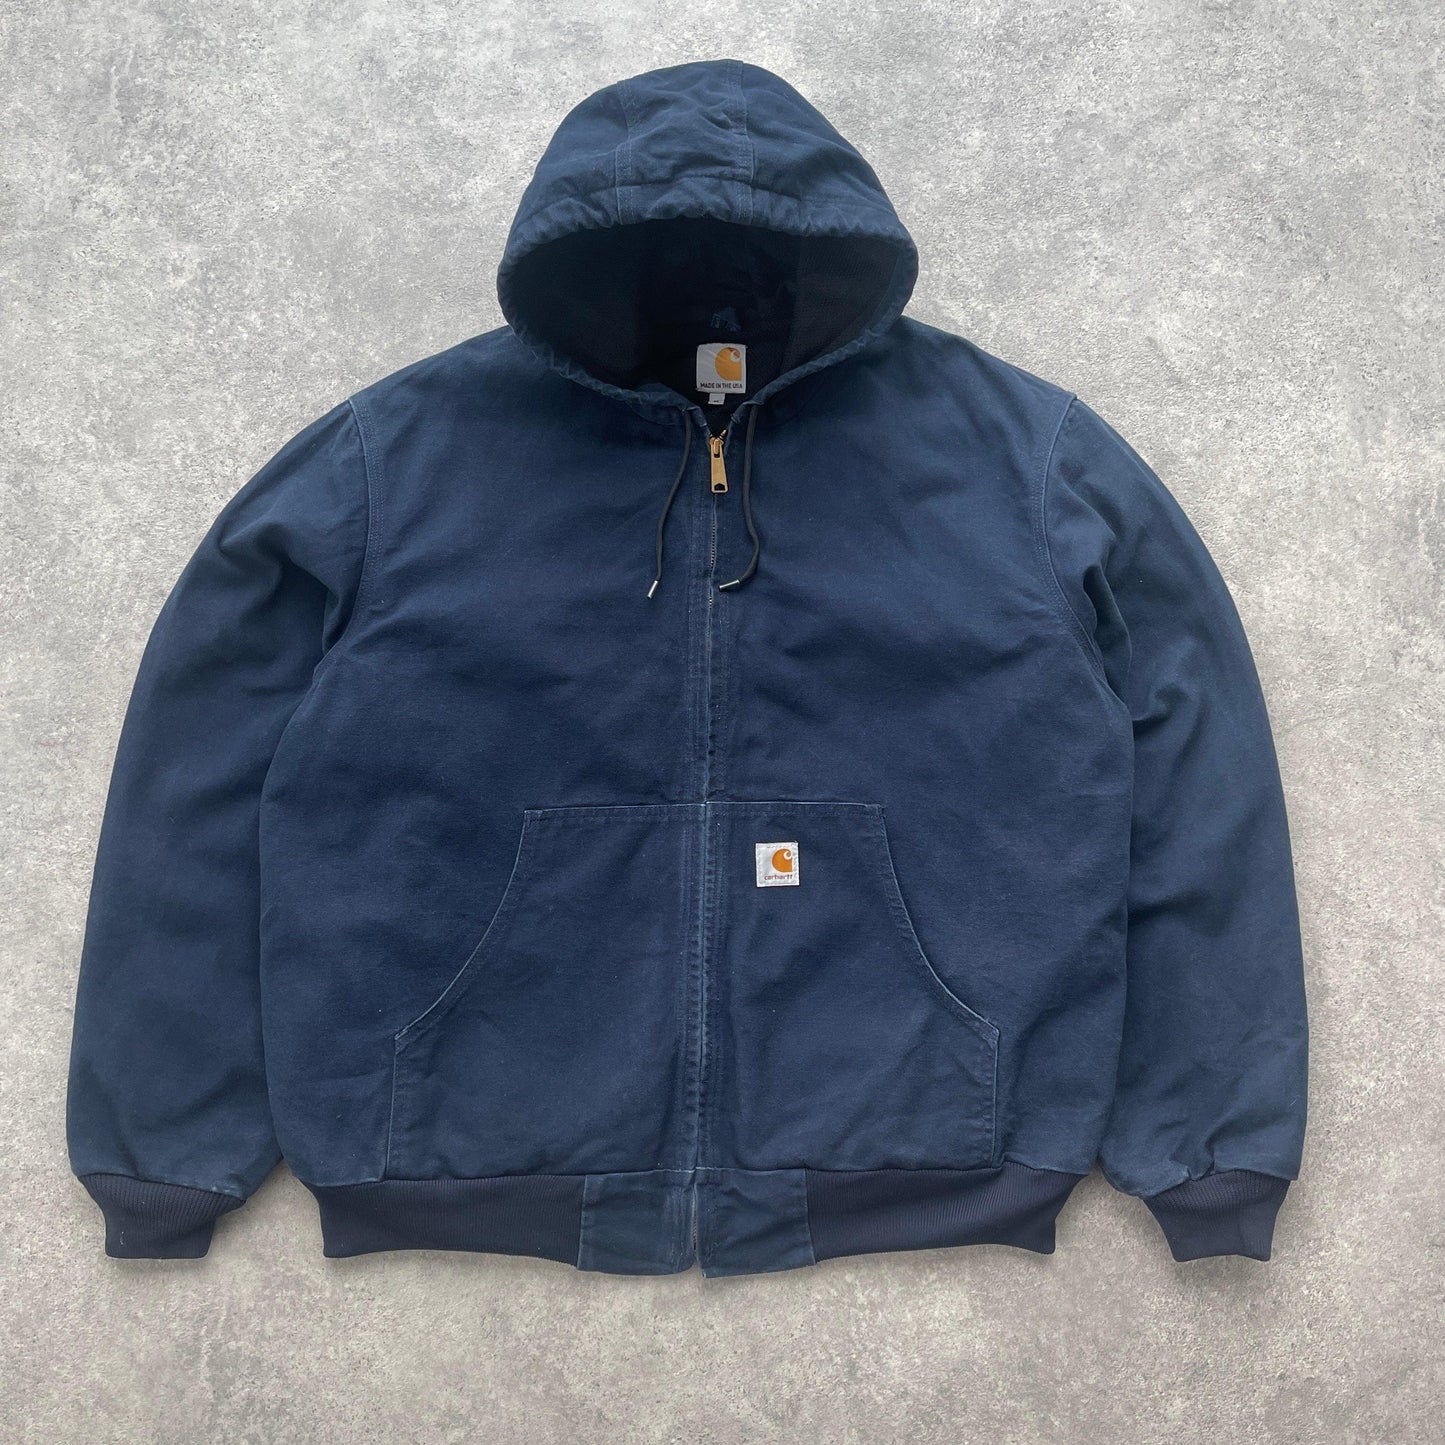 Carhartt 2008 heavyweight hooded active jacket (XL) - Known Source